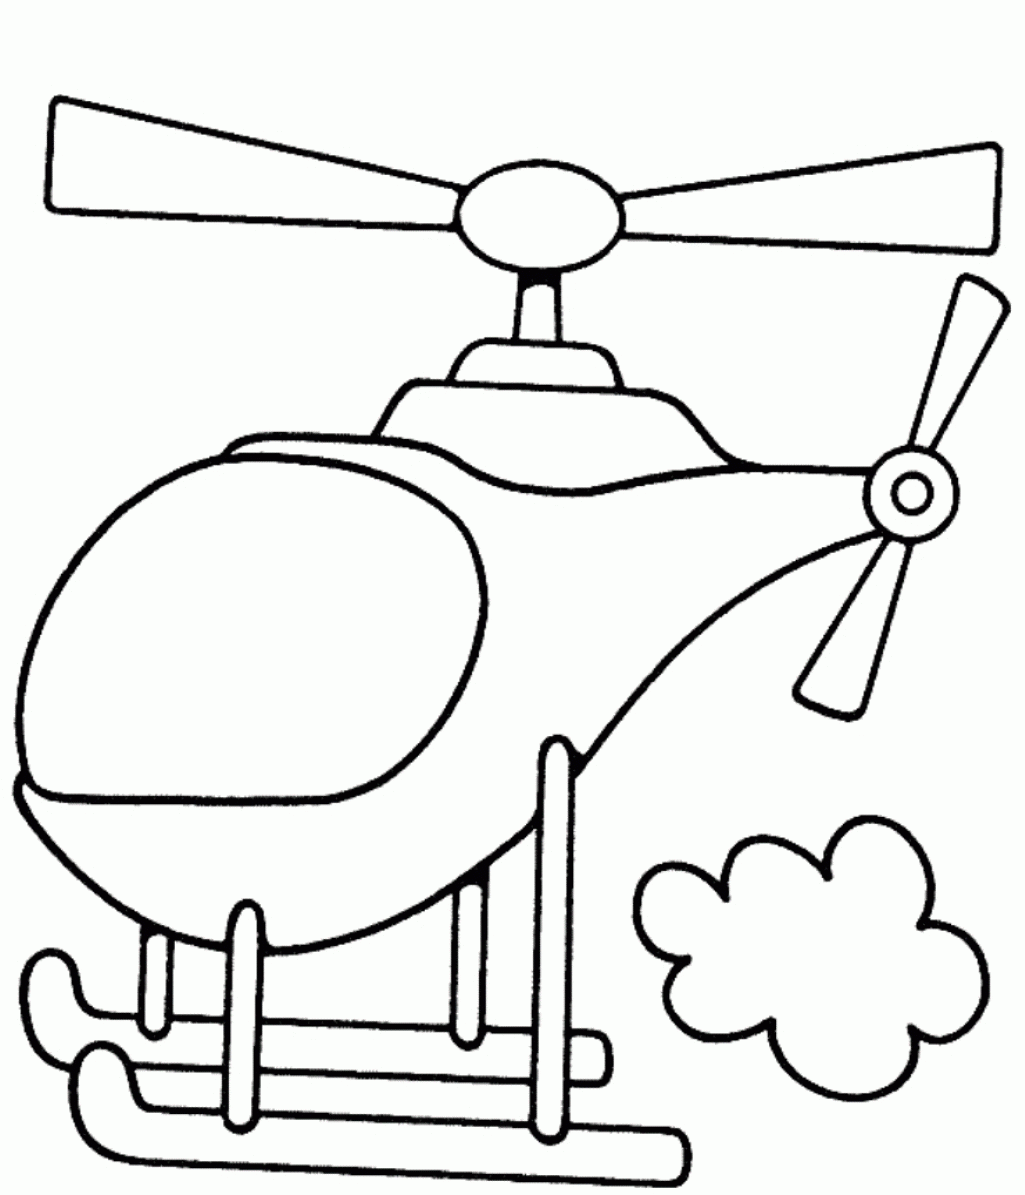 Download Submarine Coloring Pages To Print - Coloring Home